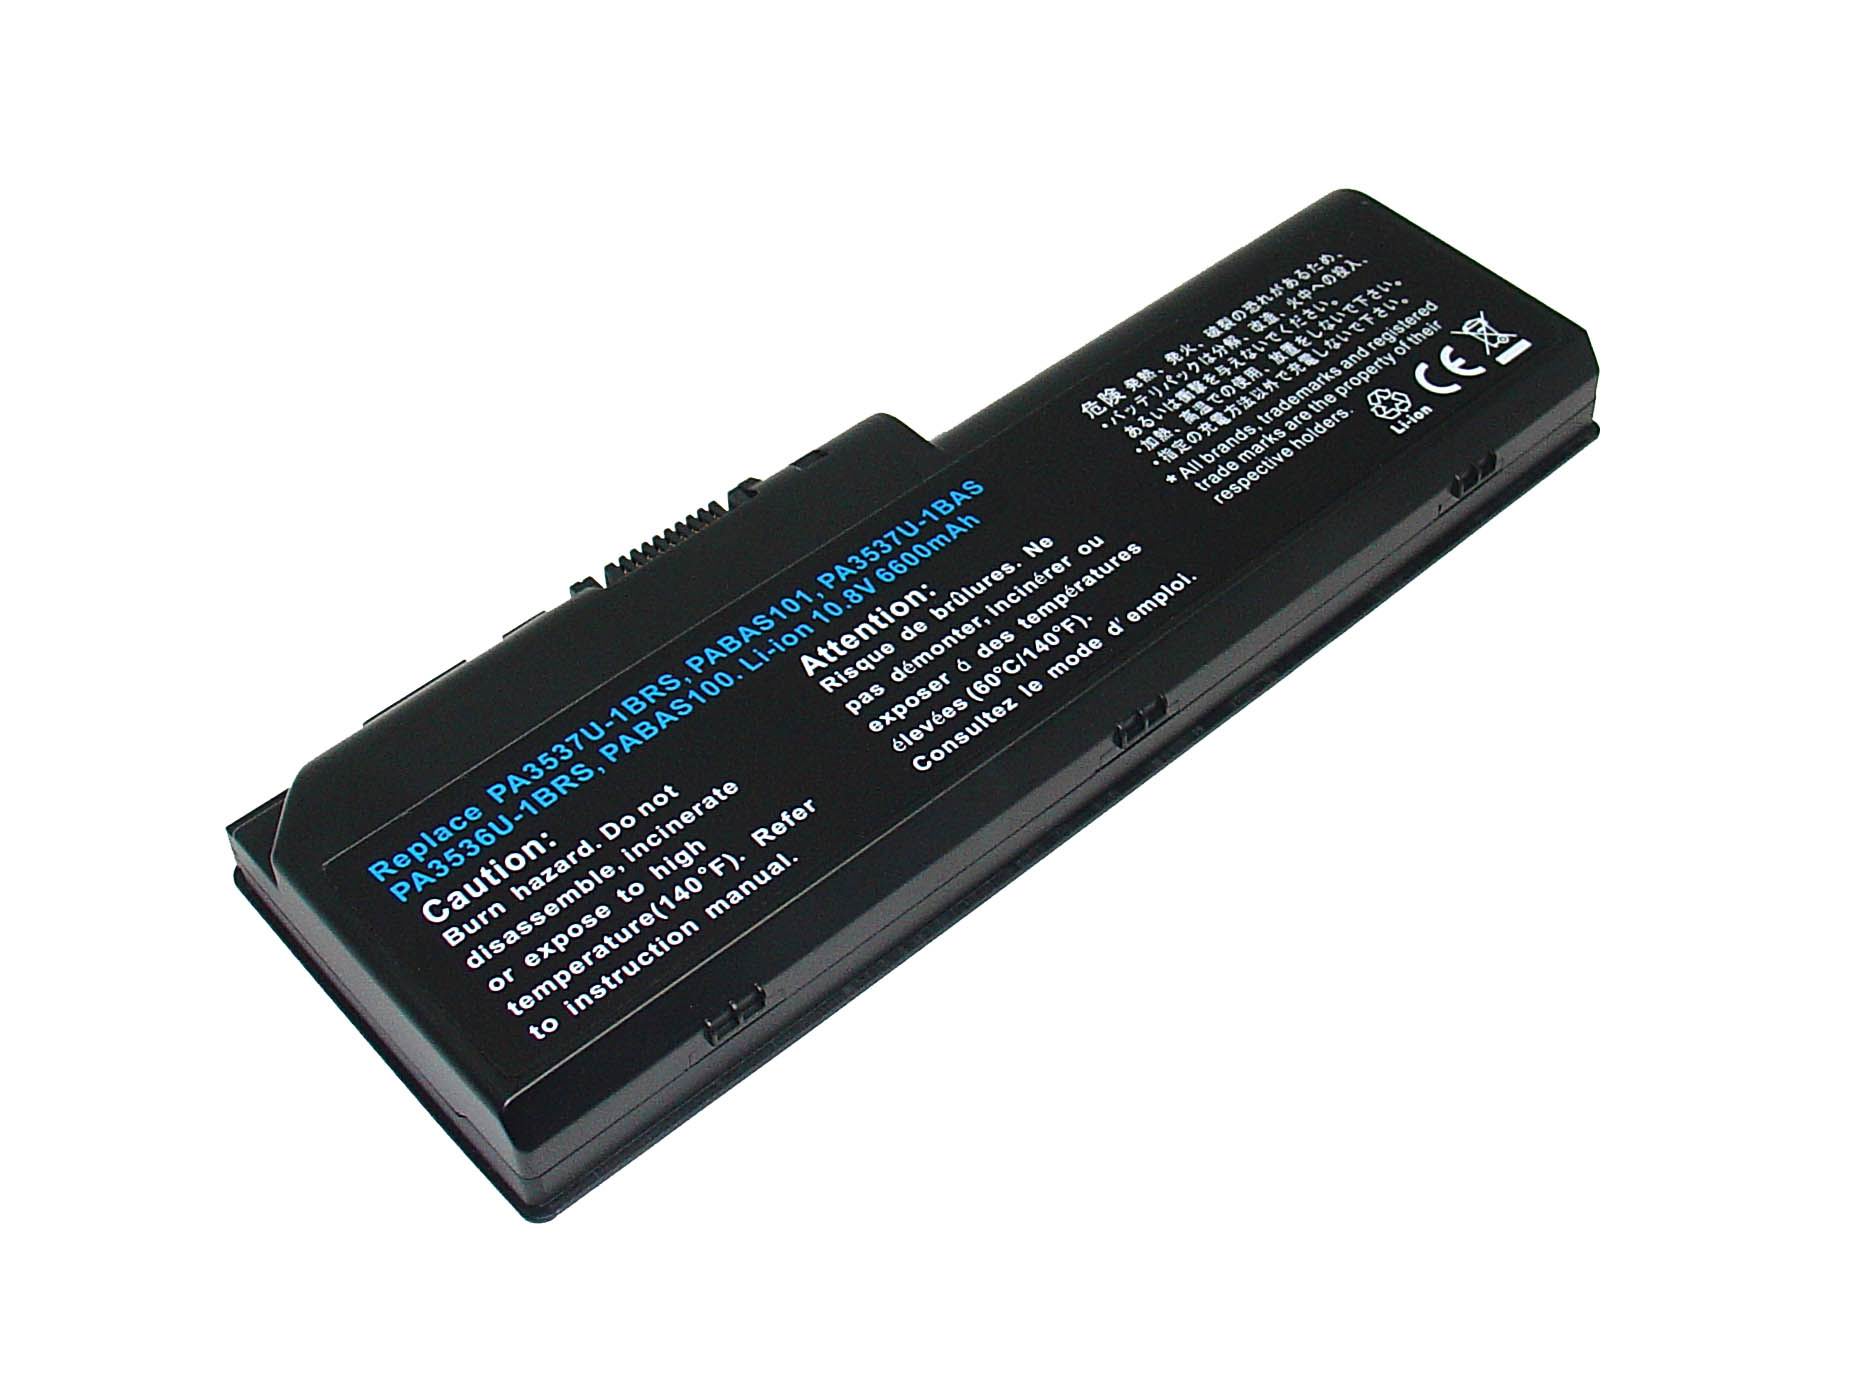 Replacement TOSHIBA Satellite P200D-111 Laptop Battery